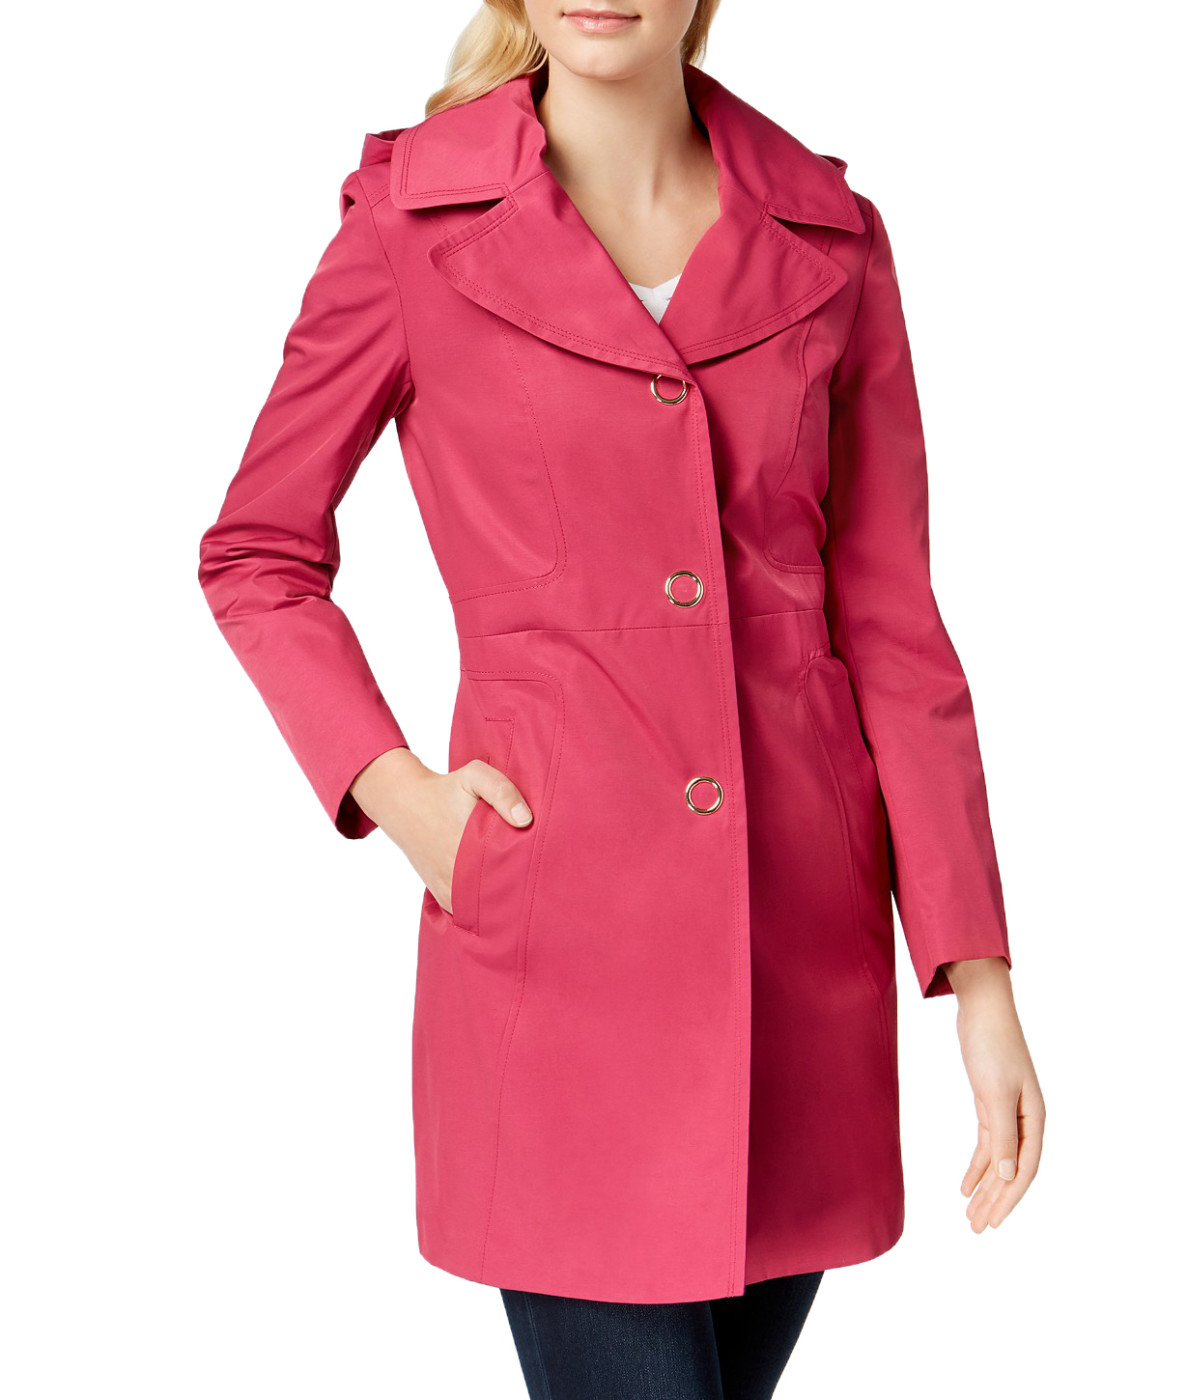 woocommerce-673321-2209615.cloudwaysapps.com-anne-klein-womens-pink-hooded-trench-coat